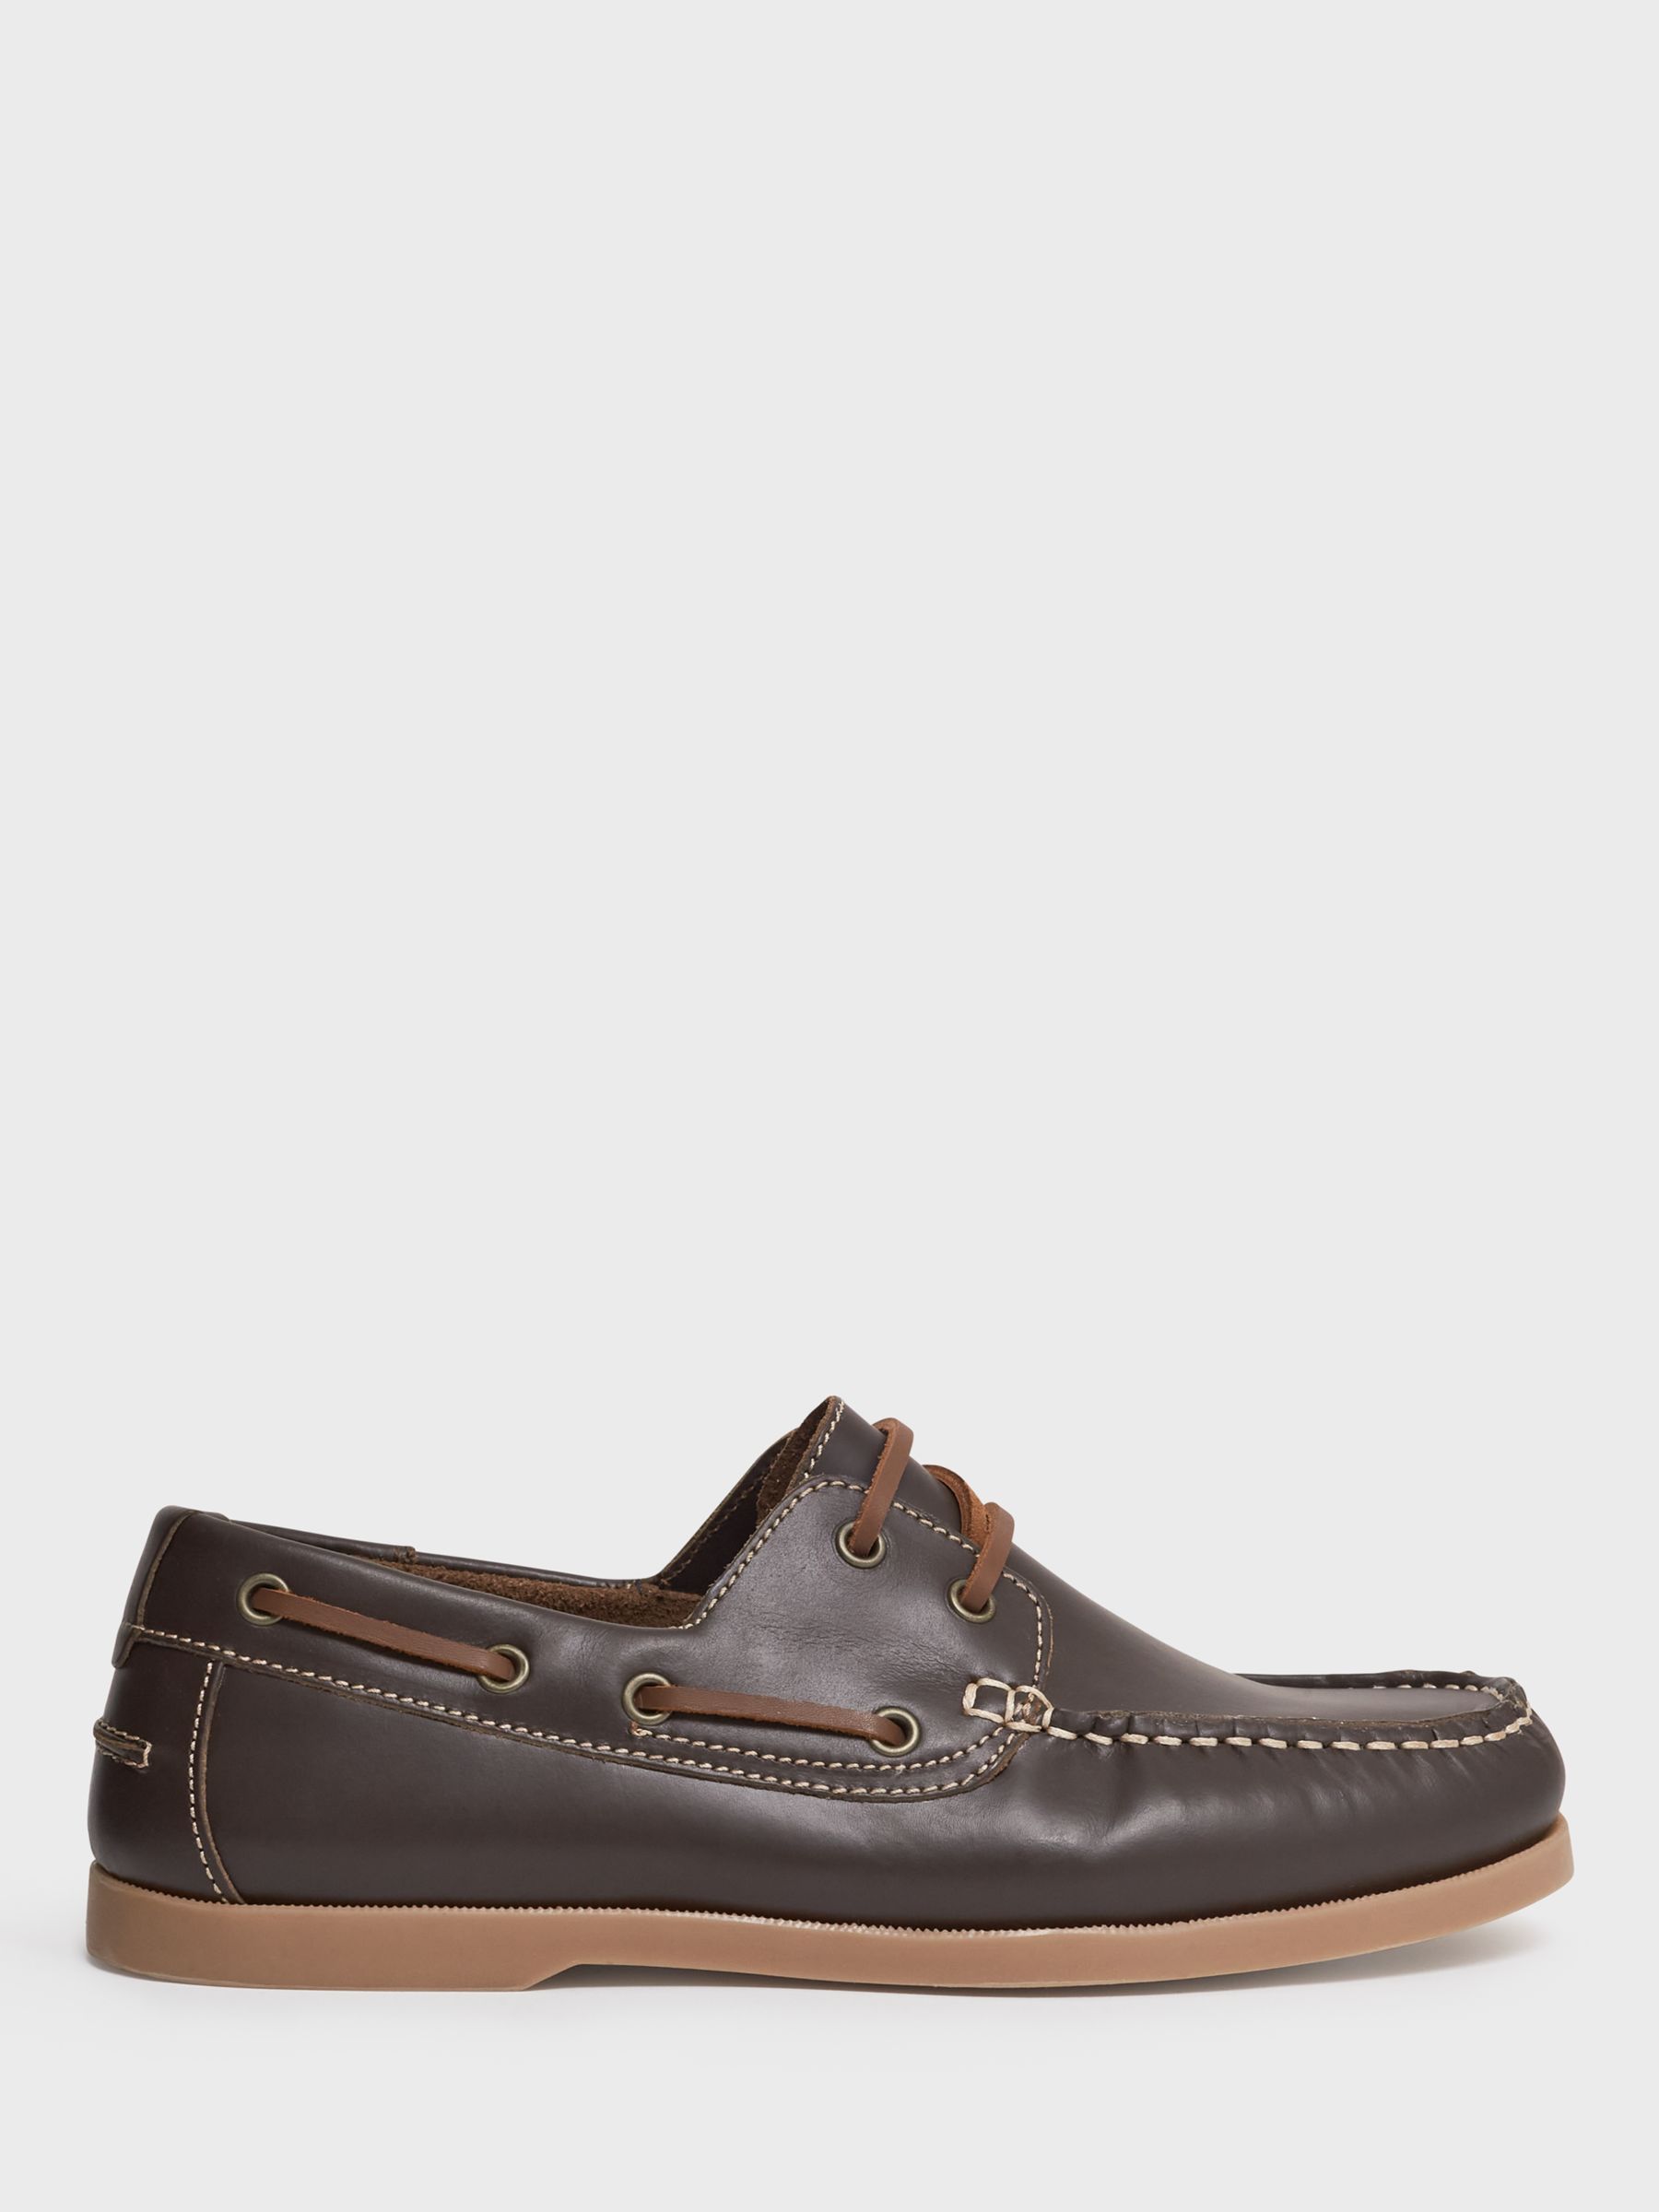 Crew Clothing Autsell Leather Deck Shoes, Chocolate Brown at John Lewis ...